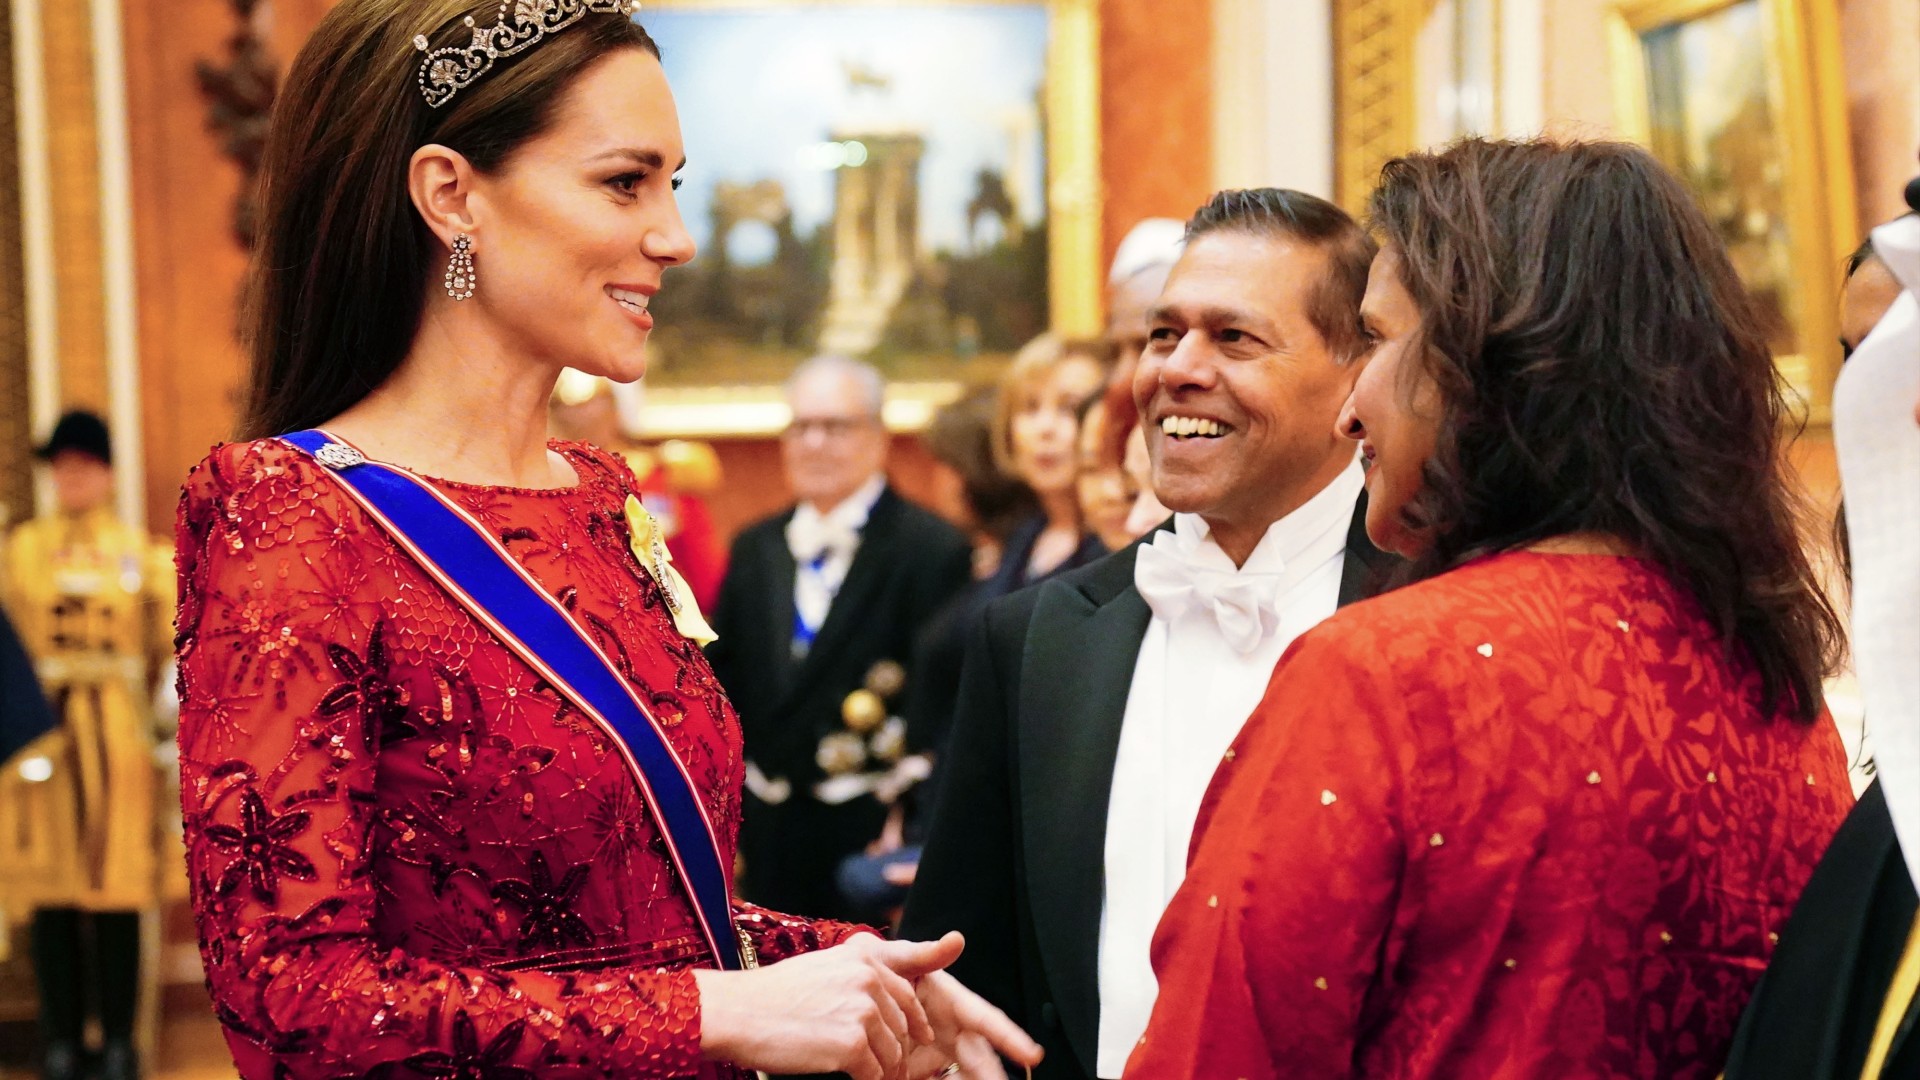 Kate Middleton Was a Holiday Princess in Red Sequins and a Delicate Tiara